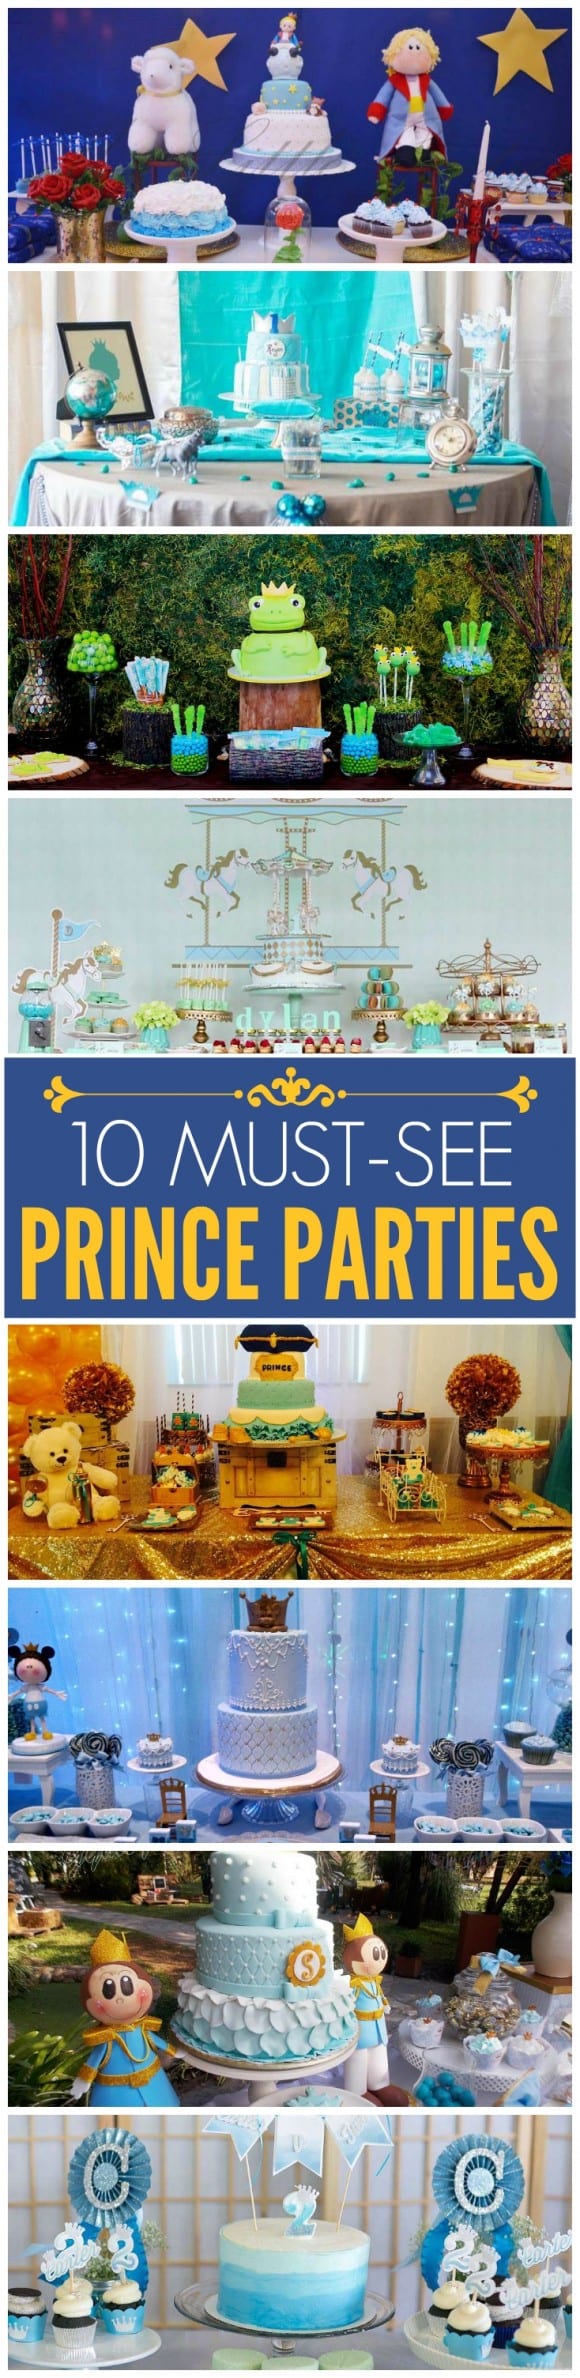 10 must see prince parties | CatchMyParty.com